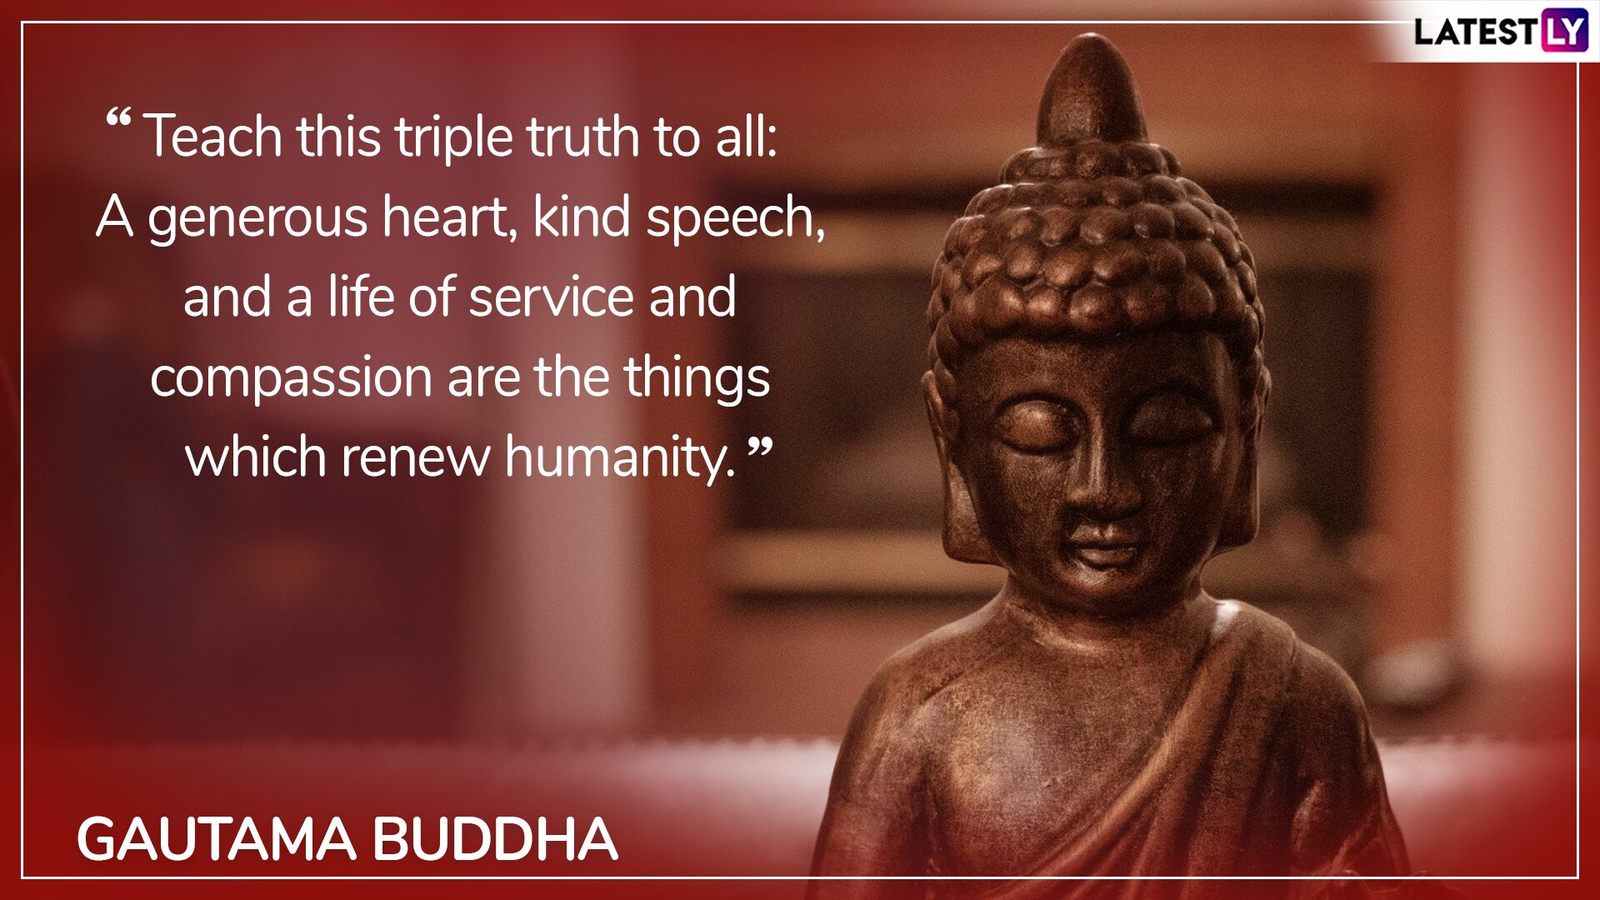 9-quotes-and-messages-share-these-inspirational-teachings-by-lord-buddha-to-celebrate-latestly-5.jpg